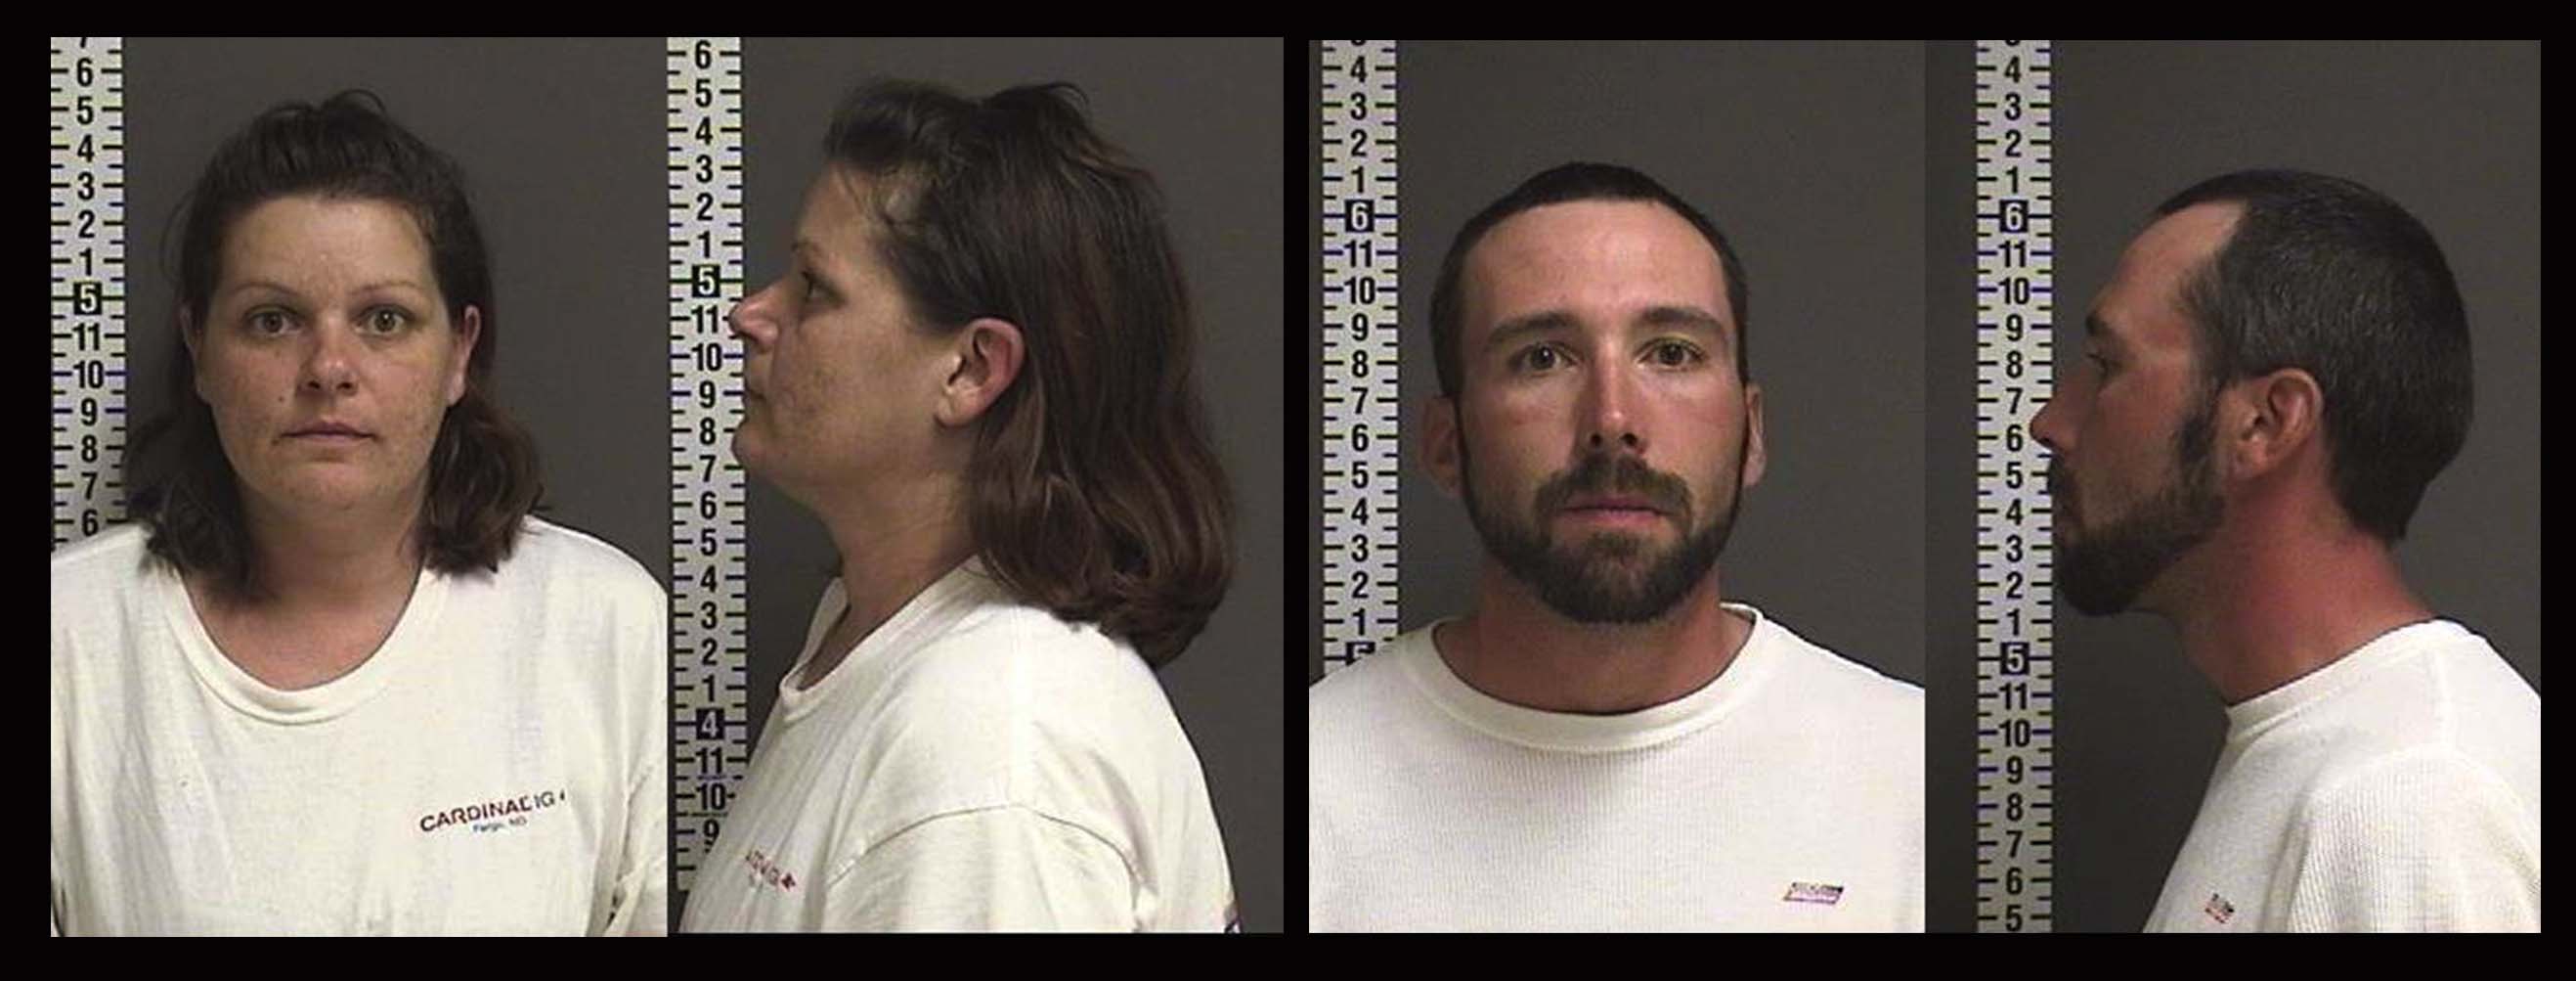 Brooke Lynn Crews and William Henry Hoehn - photo provided by the Fargo Police Department